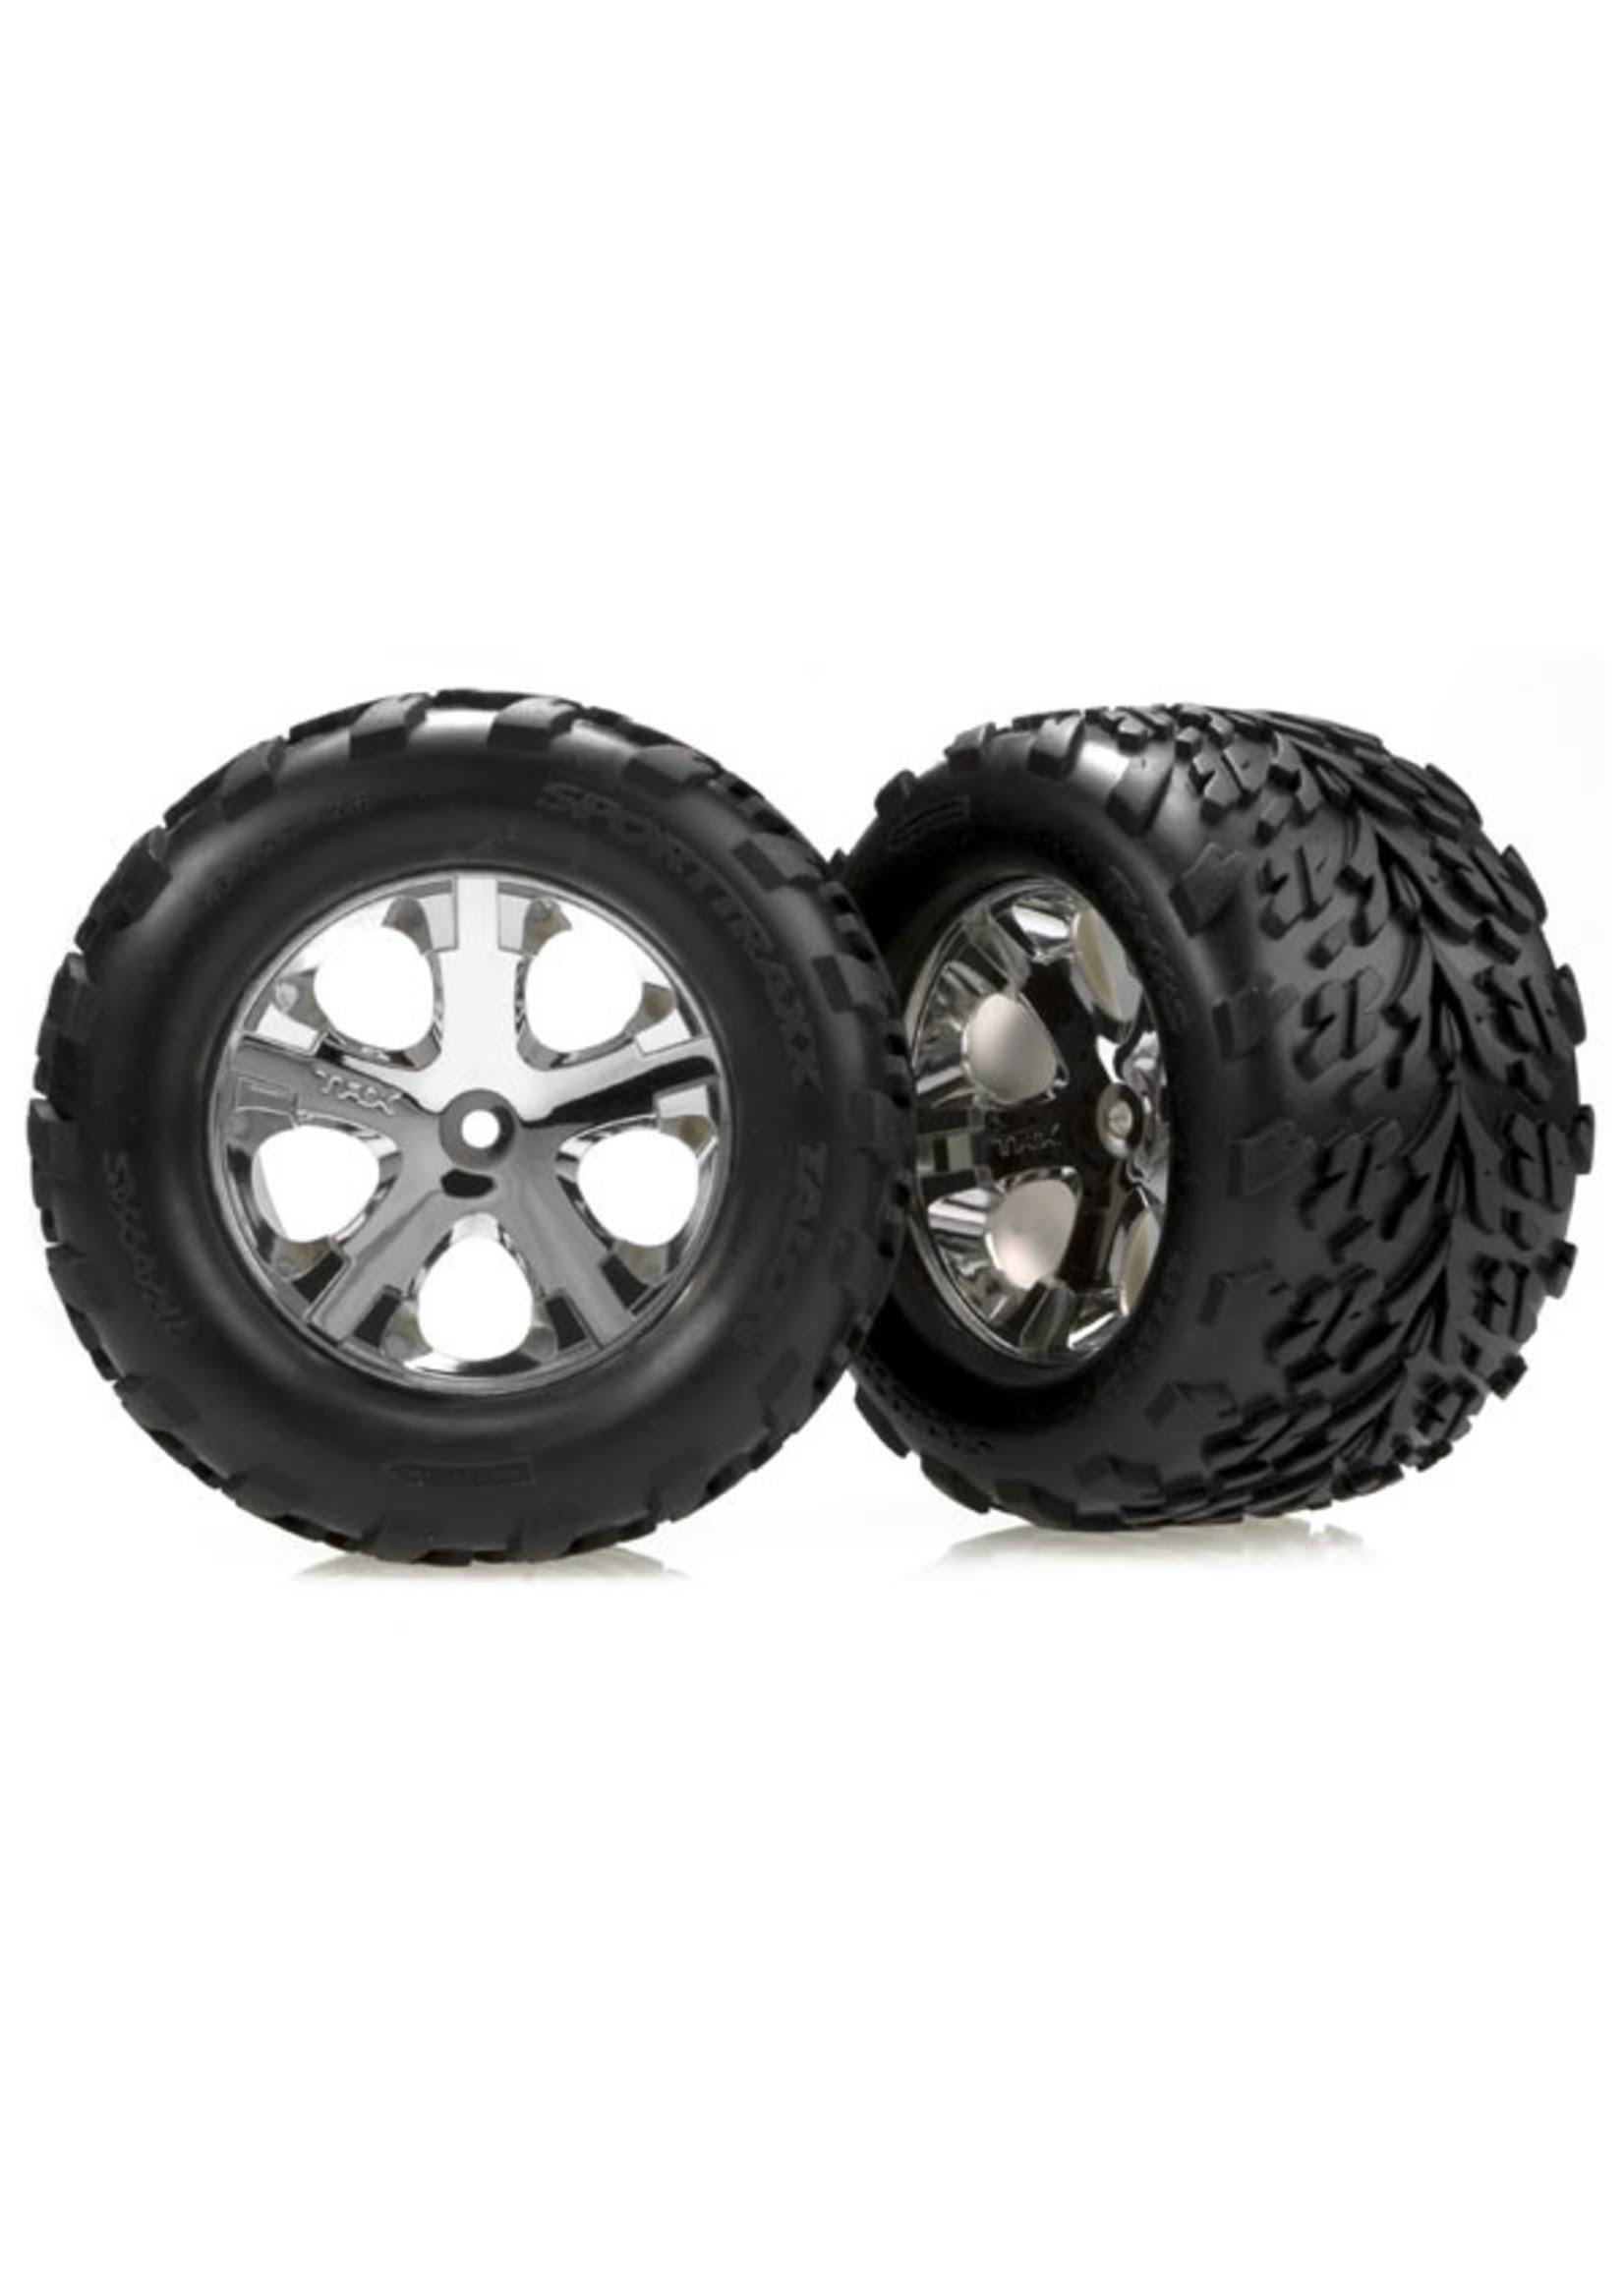 Traxxas RC Model Tyres and Wheels - Assembled, Glued, 2.8"